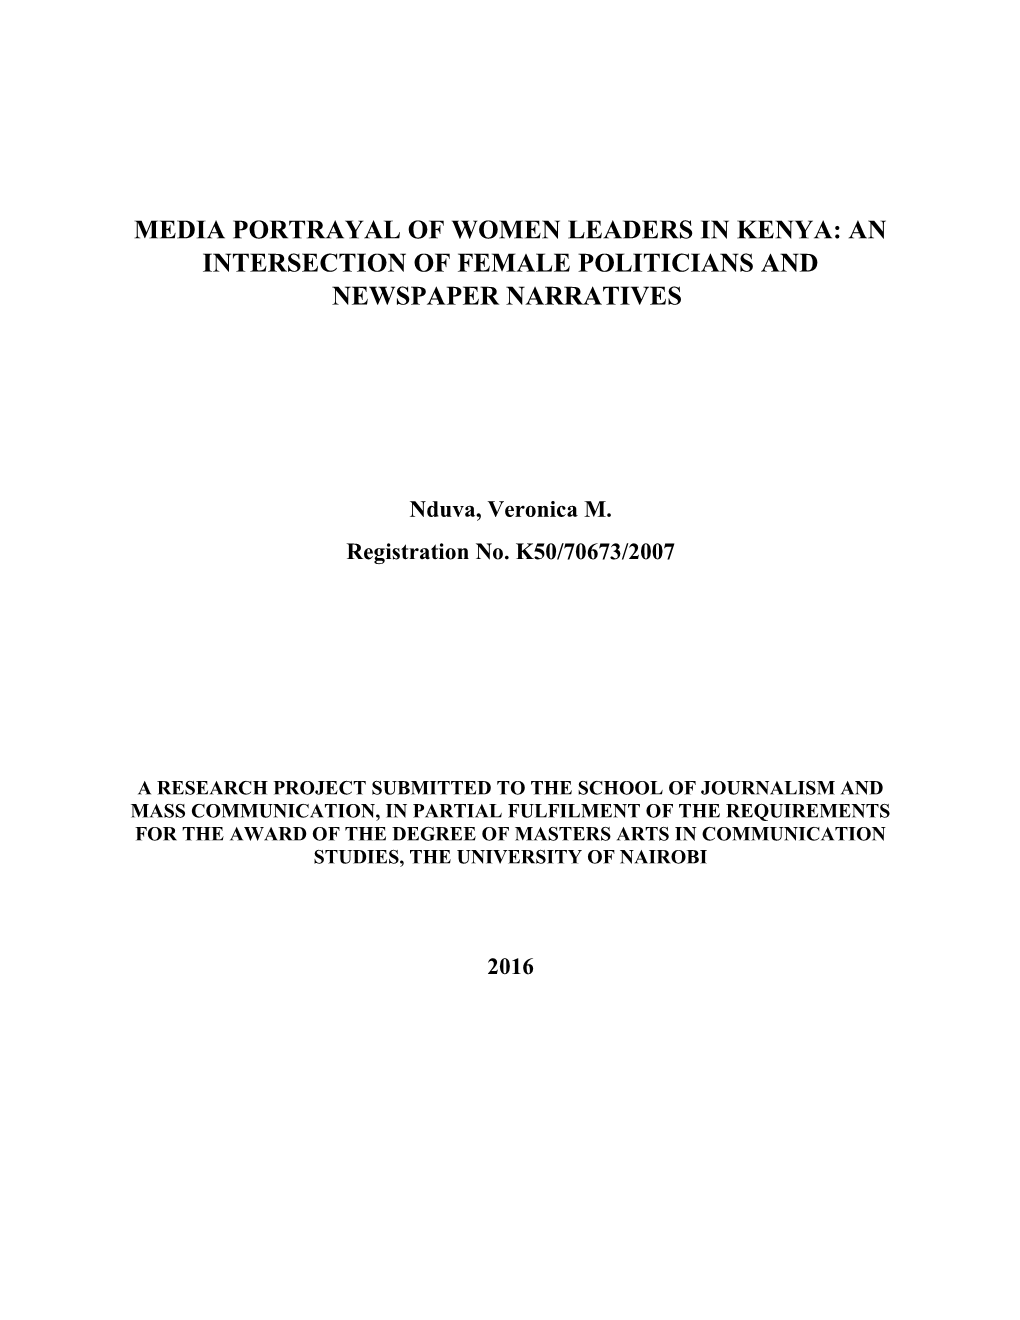 Media Portrayal of Women Leaders in Kenya: an Intersection of Female Politicians and Newspaper Narratives